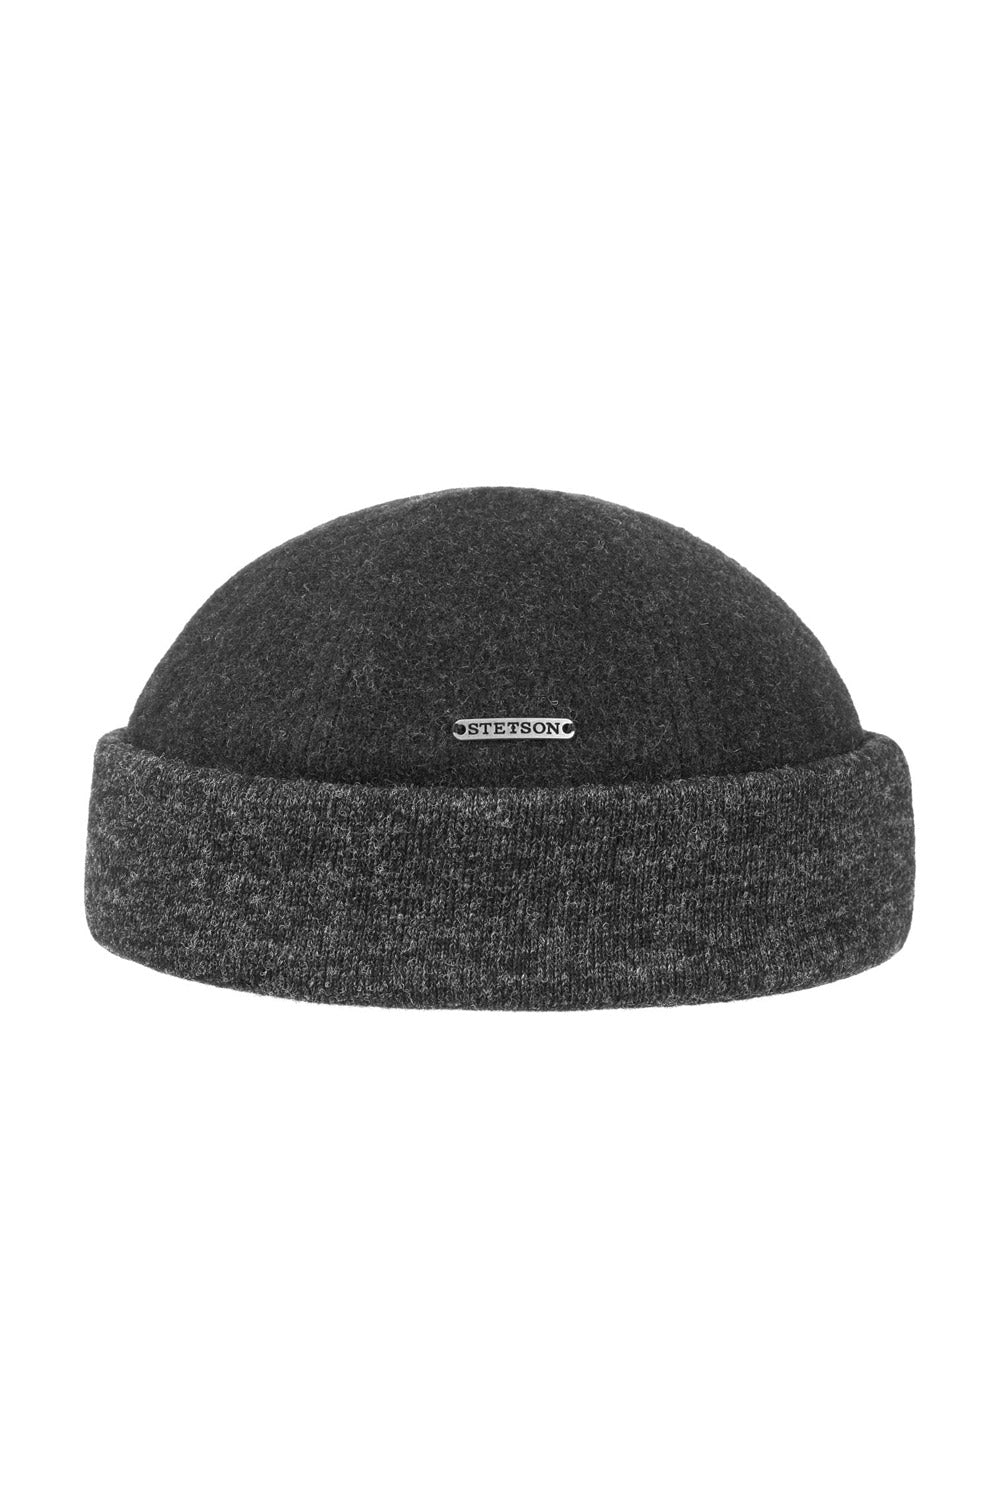 Buy the Stetson Sparr Mélange Docker Beanie in Charcoal at Intro. Spend £50 for free UK delivery. Official stockists. We ship worldwide.